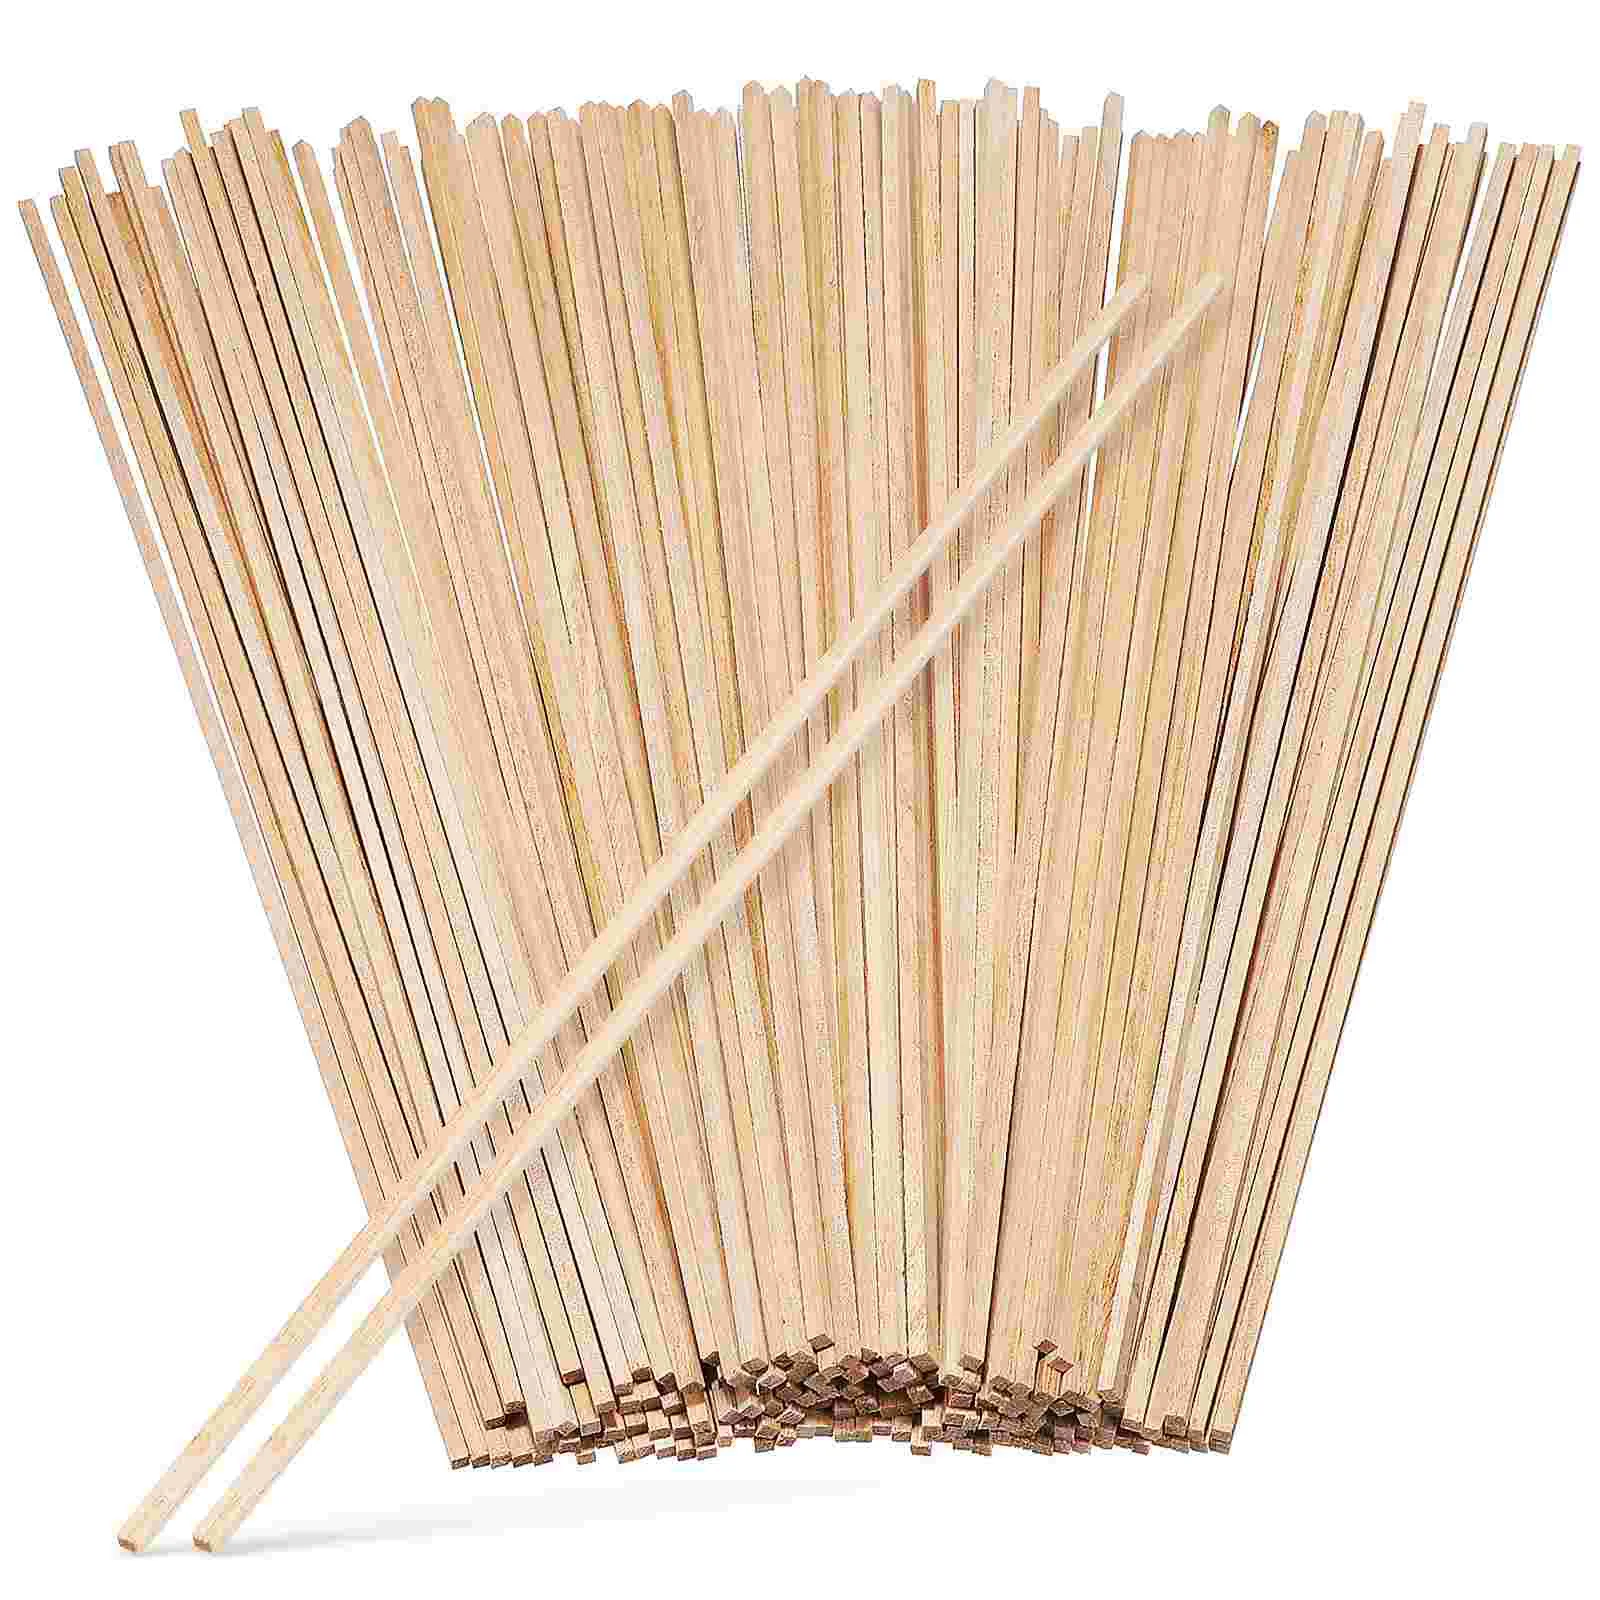 

Wood Wooden Sticks Dowel Square Dowels Crafts Unfinished Craft Rods Strips Rod Hardwood Pieces Balsa Diy Tags Painting